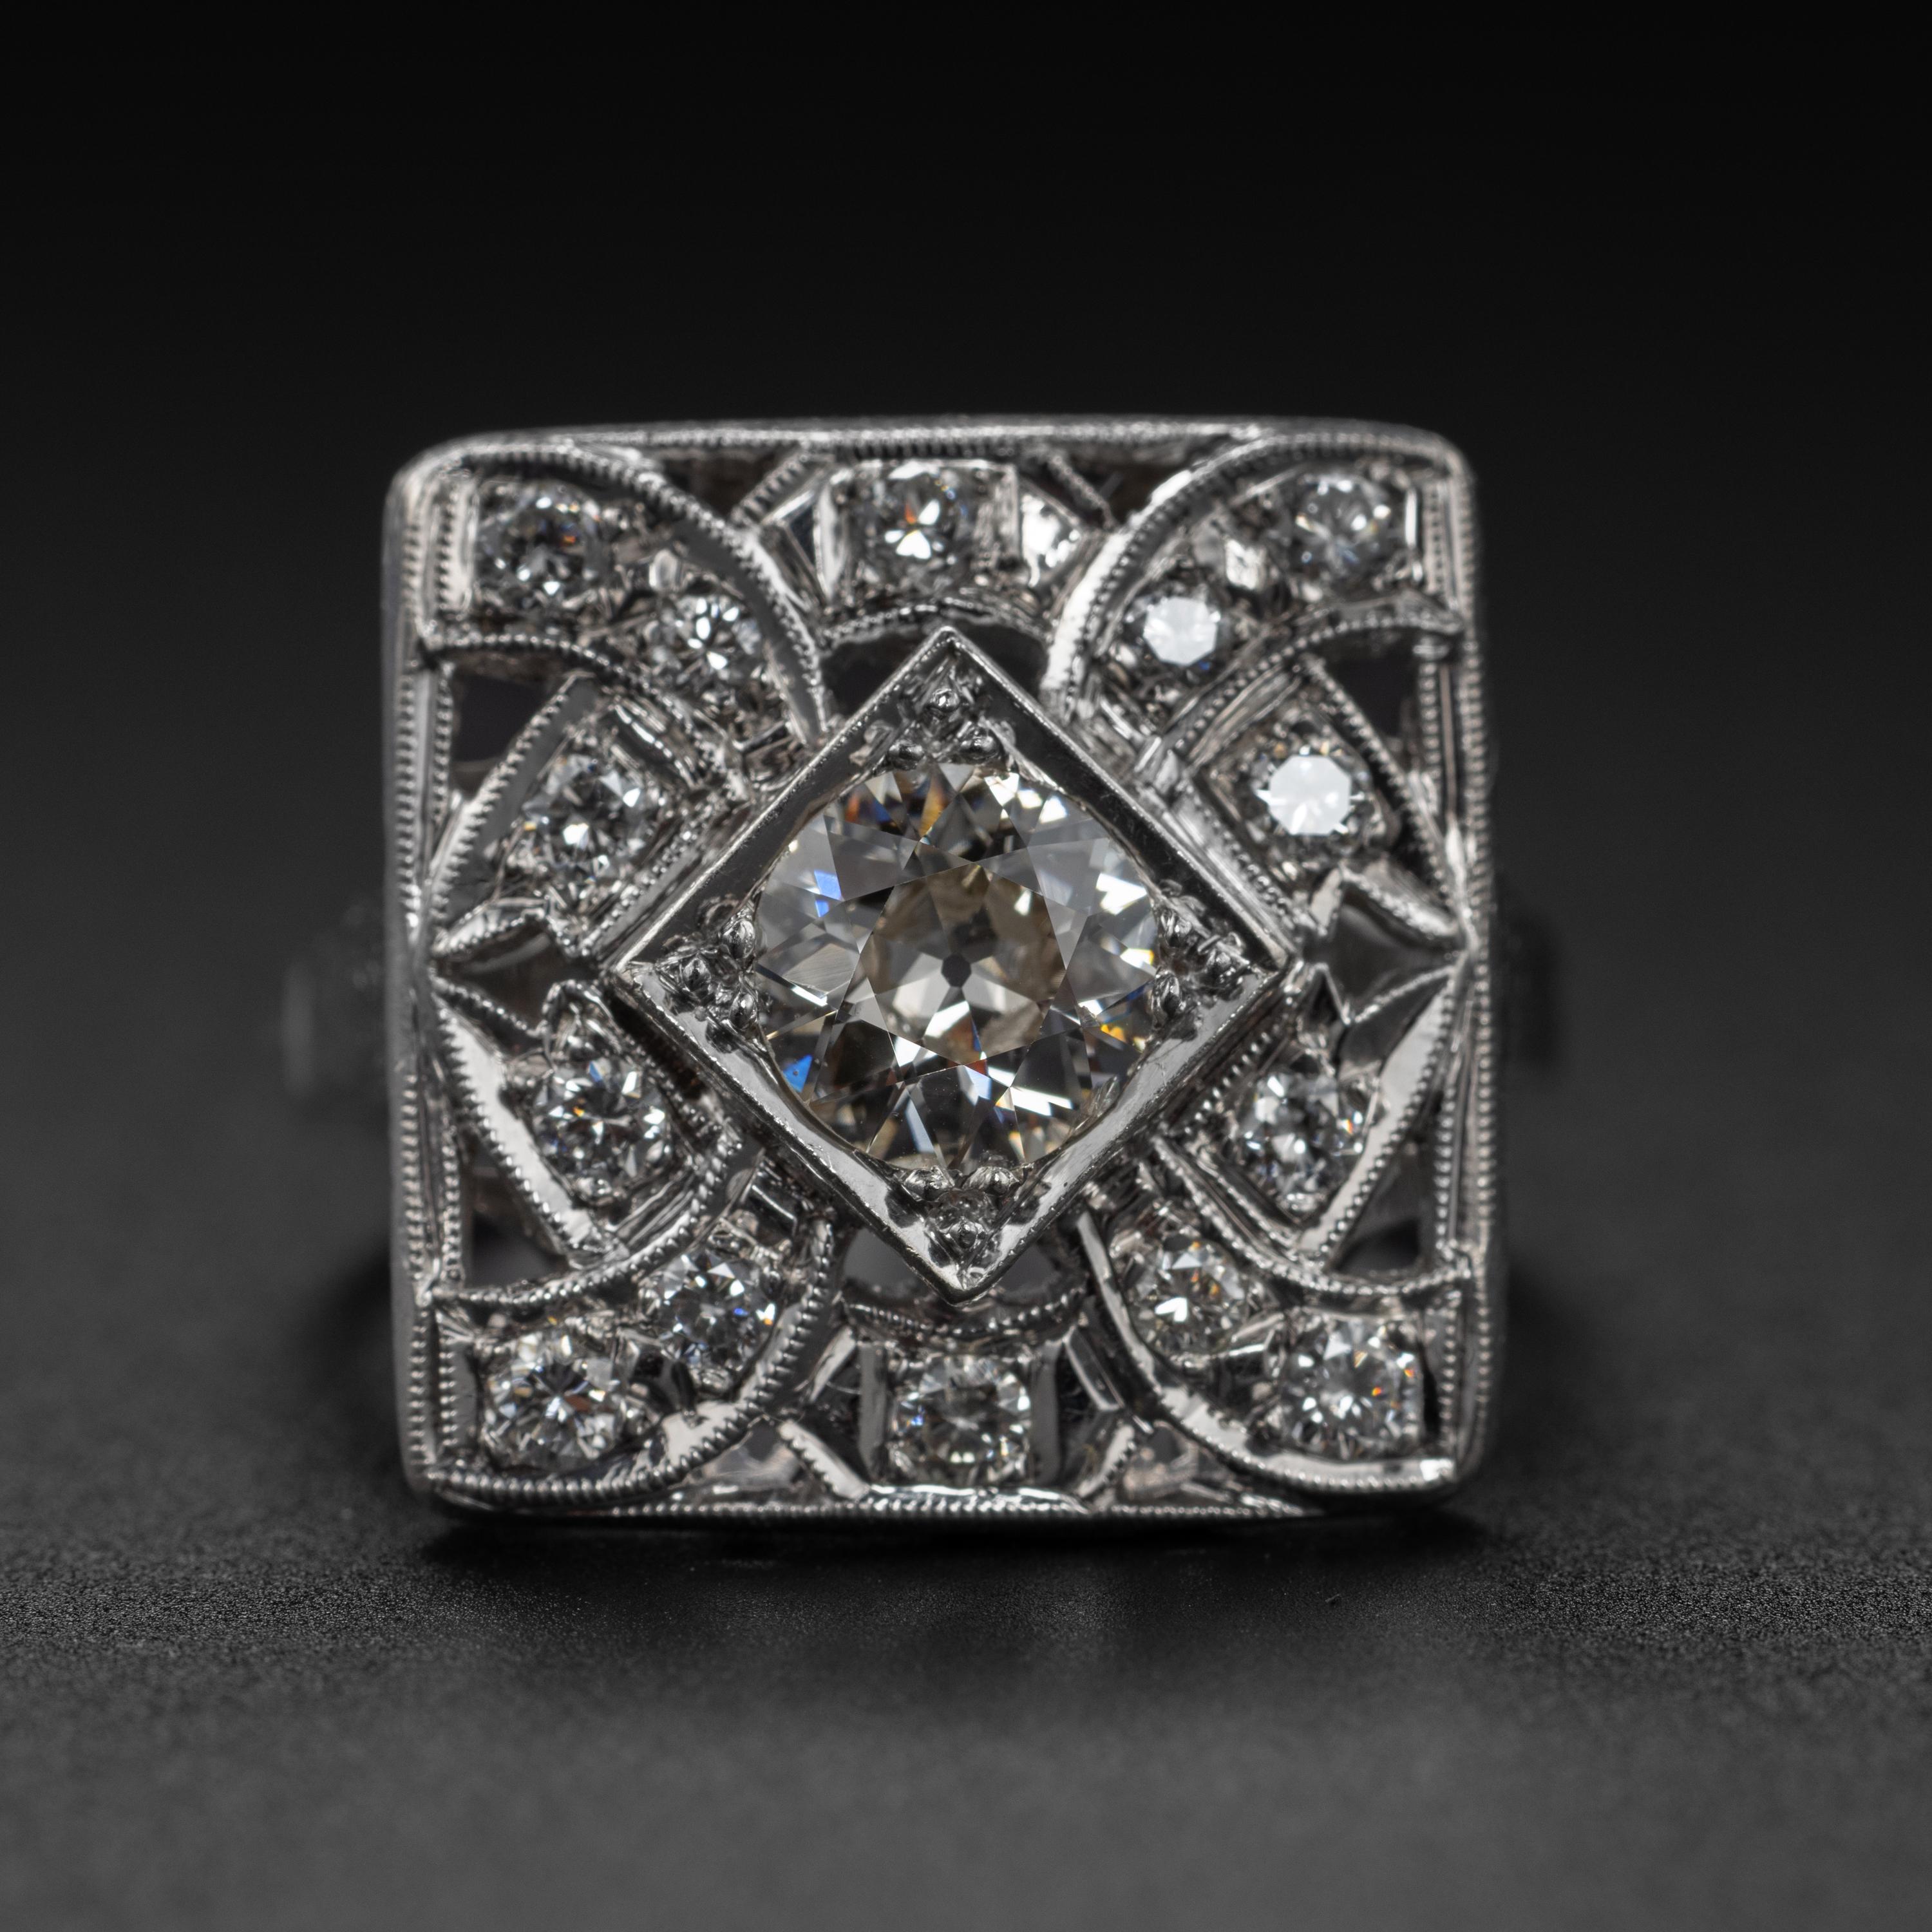 Sleek and geometric, this quintessential Art Deco diamond ring features a 1 carat very light yellow (N) eye-clean old European cut diamond in the center, surrounded by a constellation of fourteen smaller bright and white old European cut diamonds